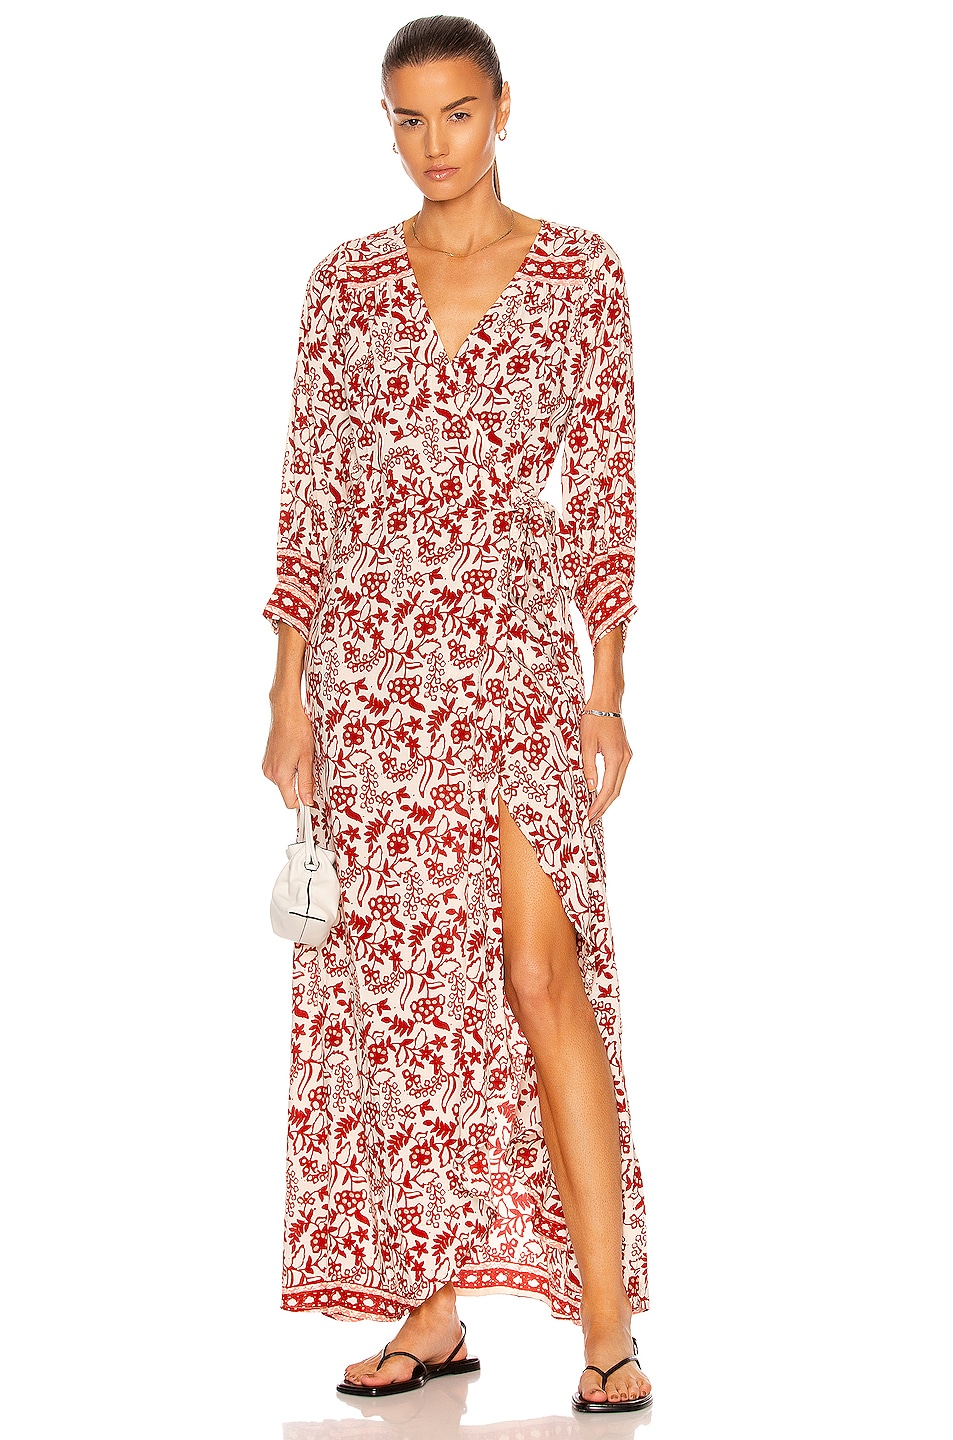 Image 1 of Natalie Martin Kate Long Sleeve Dress in Shadow Print Red